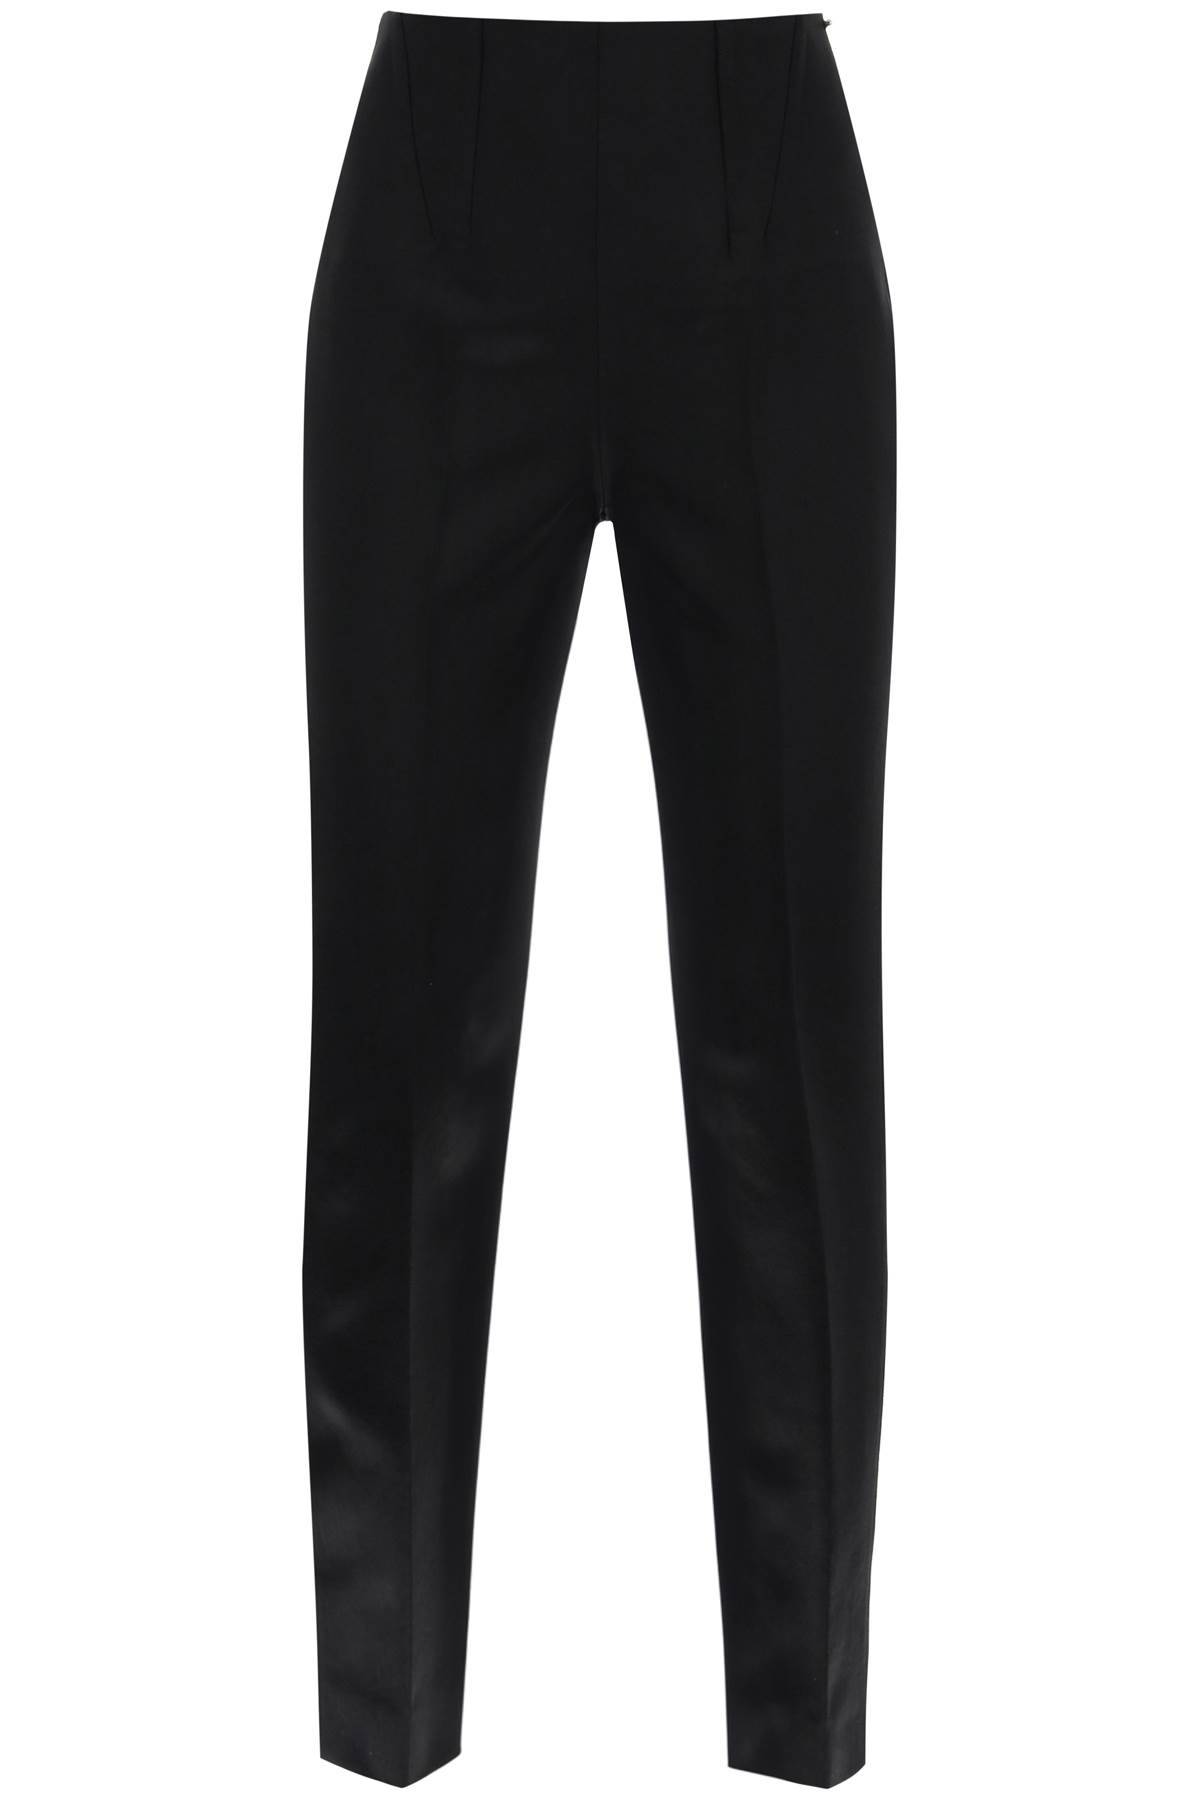 Sportmax SPORTMAX netted pants with reinforced